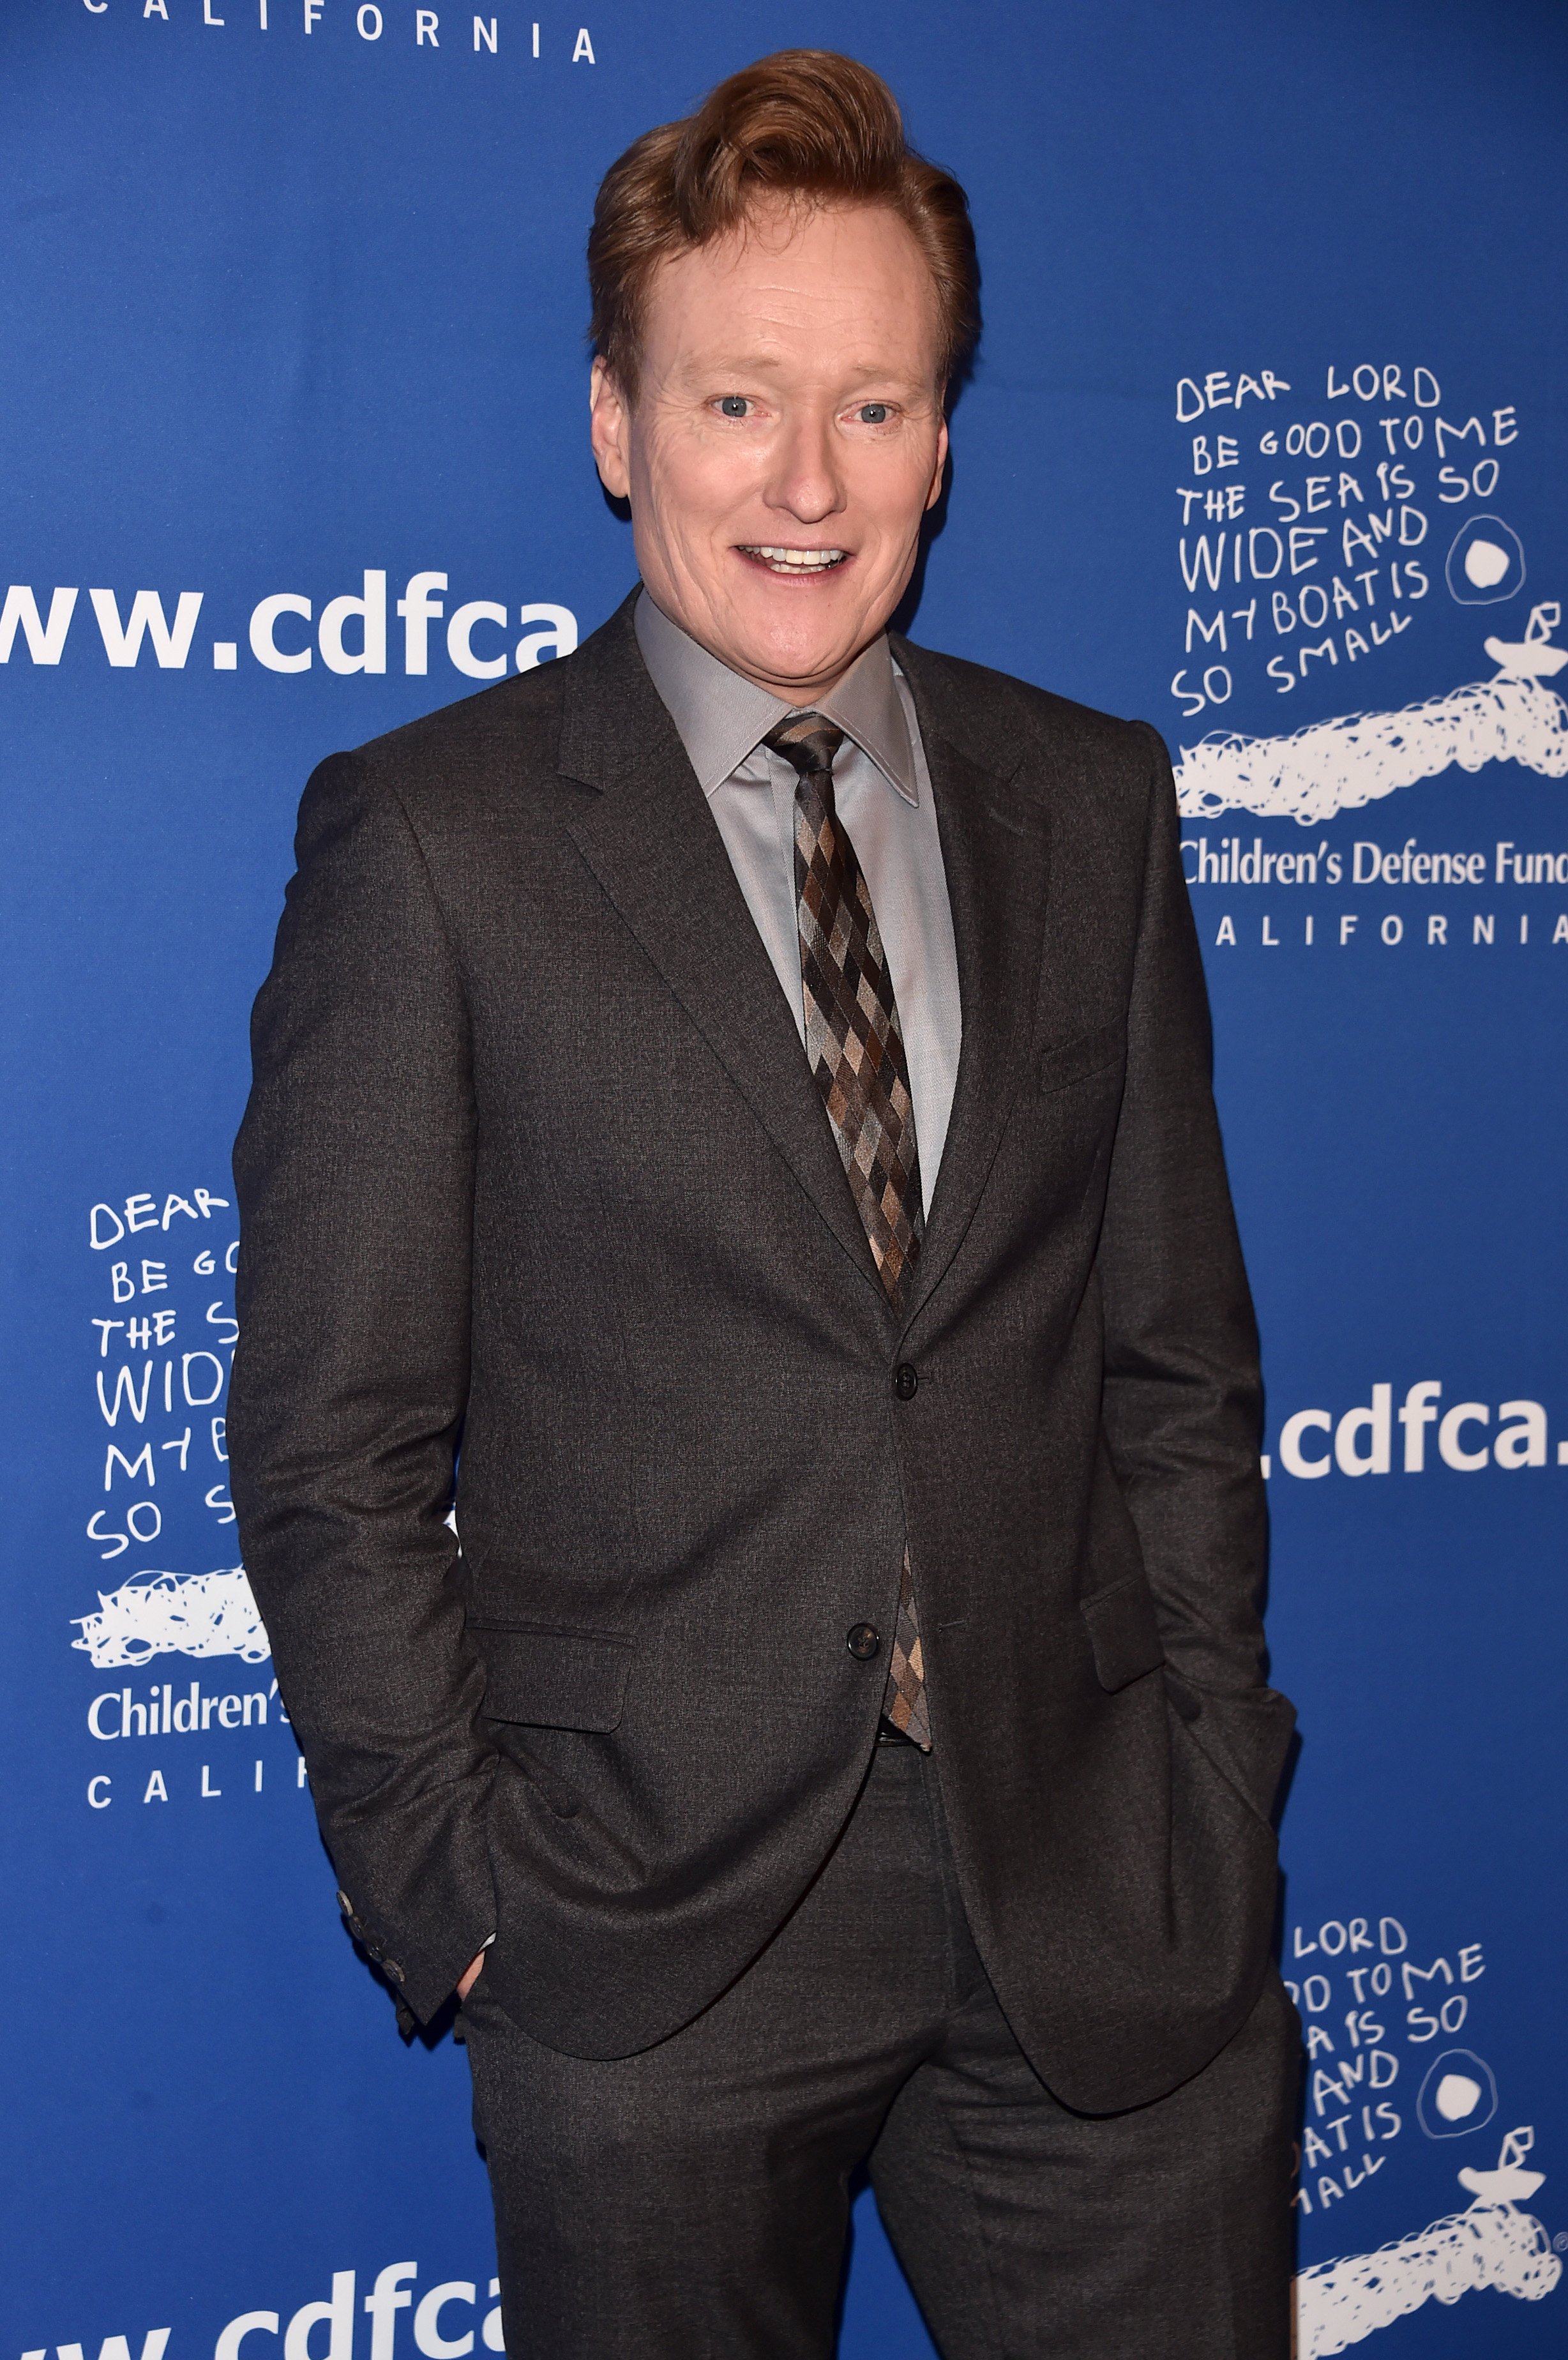 Conan O'Brien pictured at the 26th Annual Beat The Odds Awards, 2016, Beverly Hills, California. | Photo: Getty Images